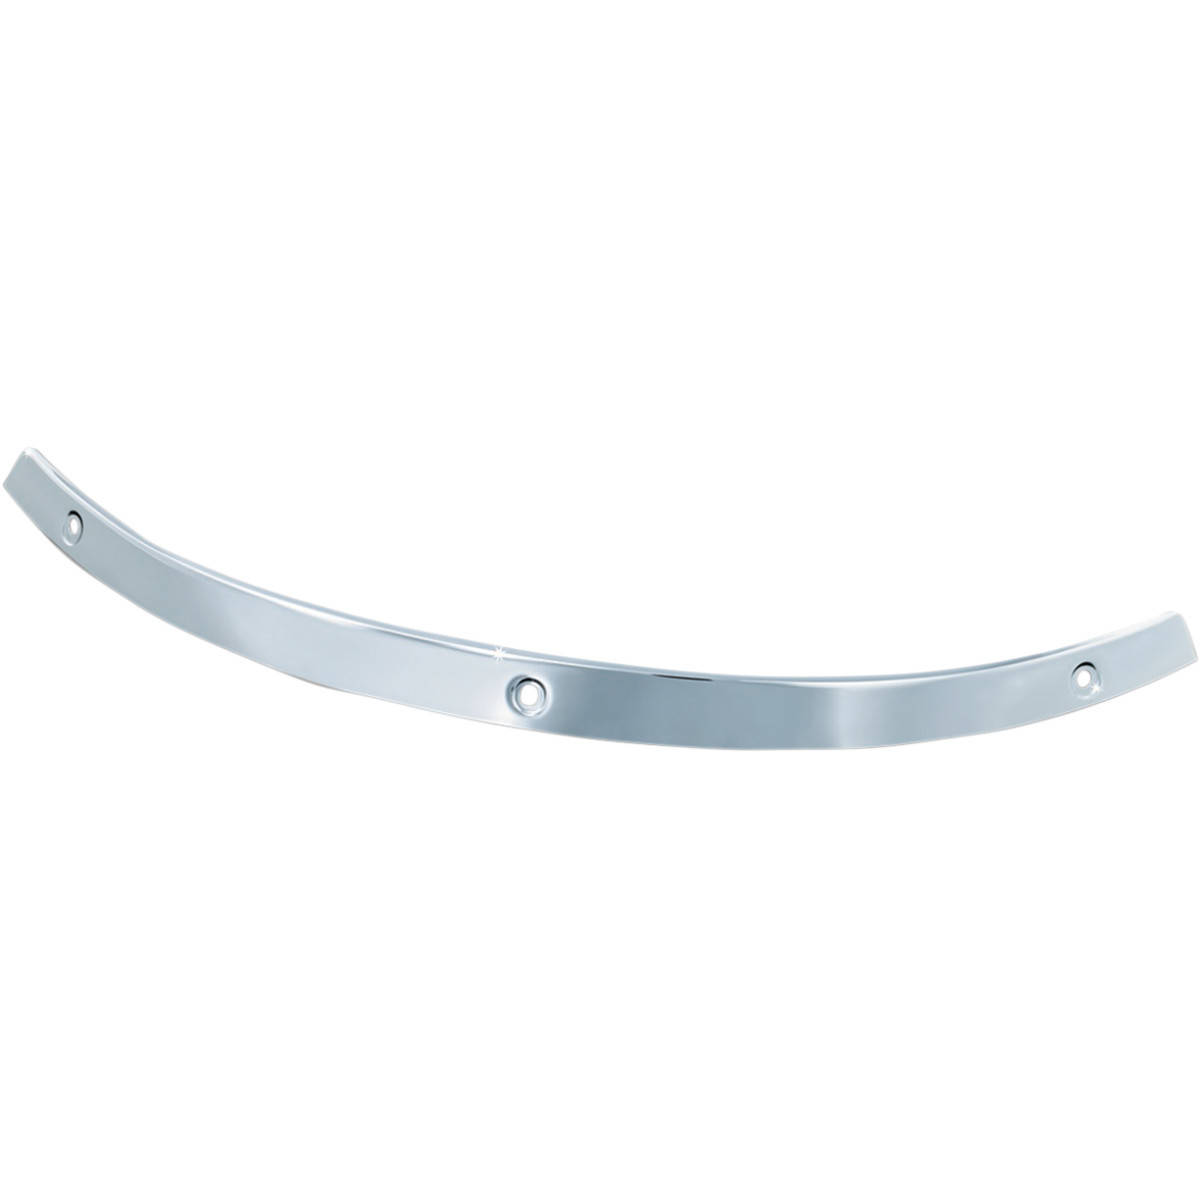 MEMPHIS MEB0973 Stainless Steel Windshield Trim Black Contrast Chain 